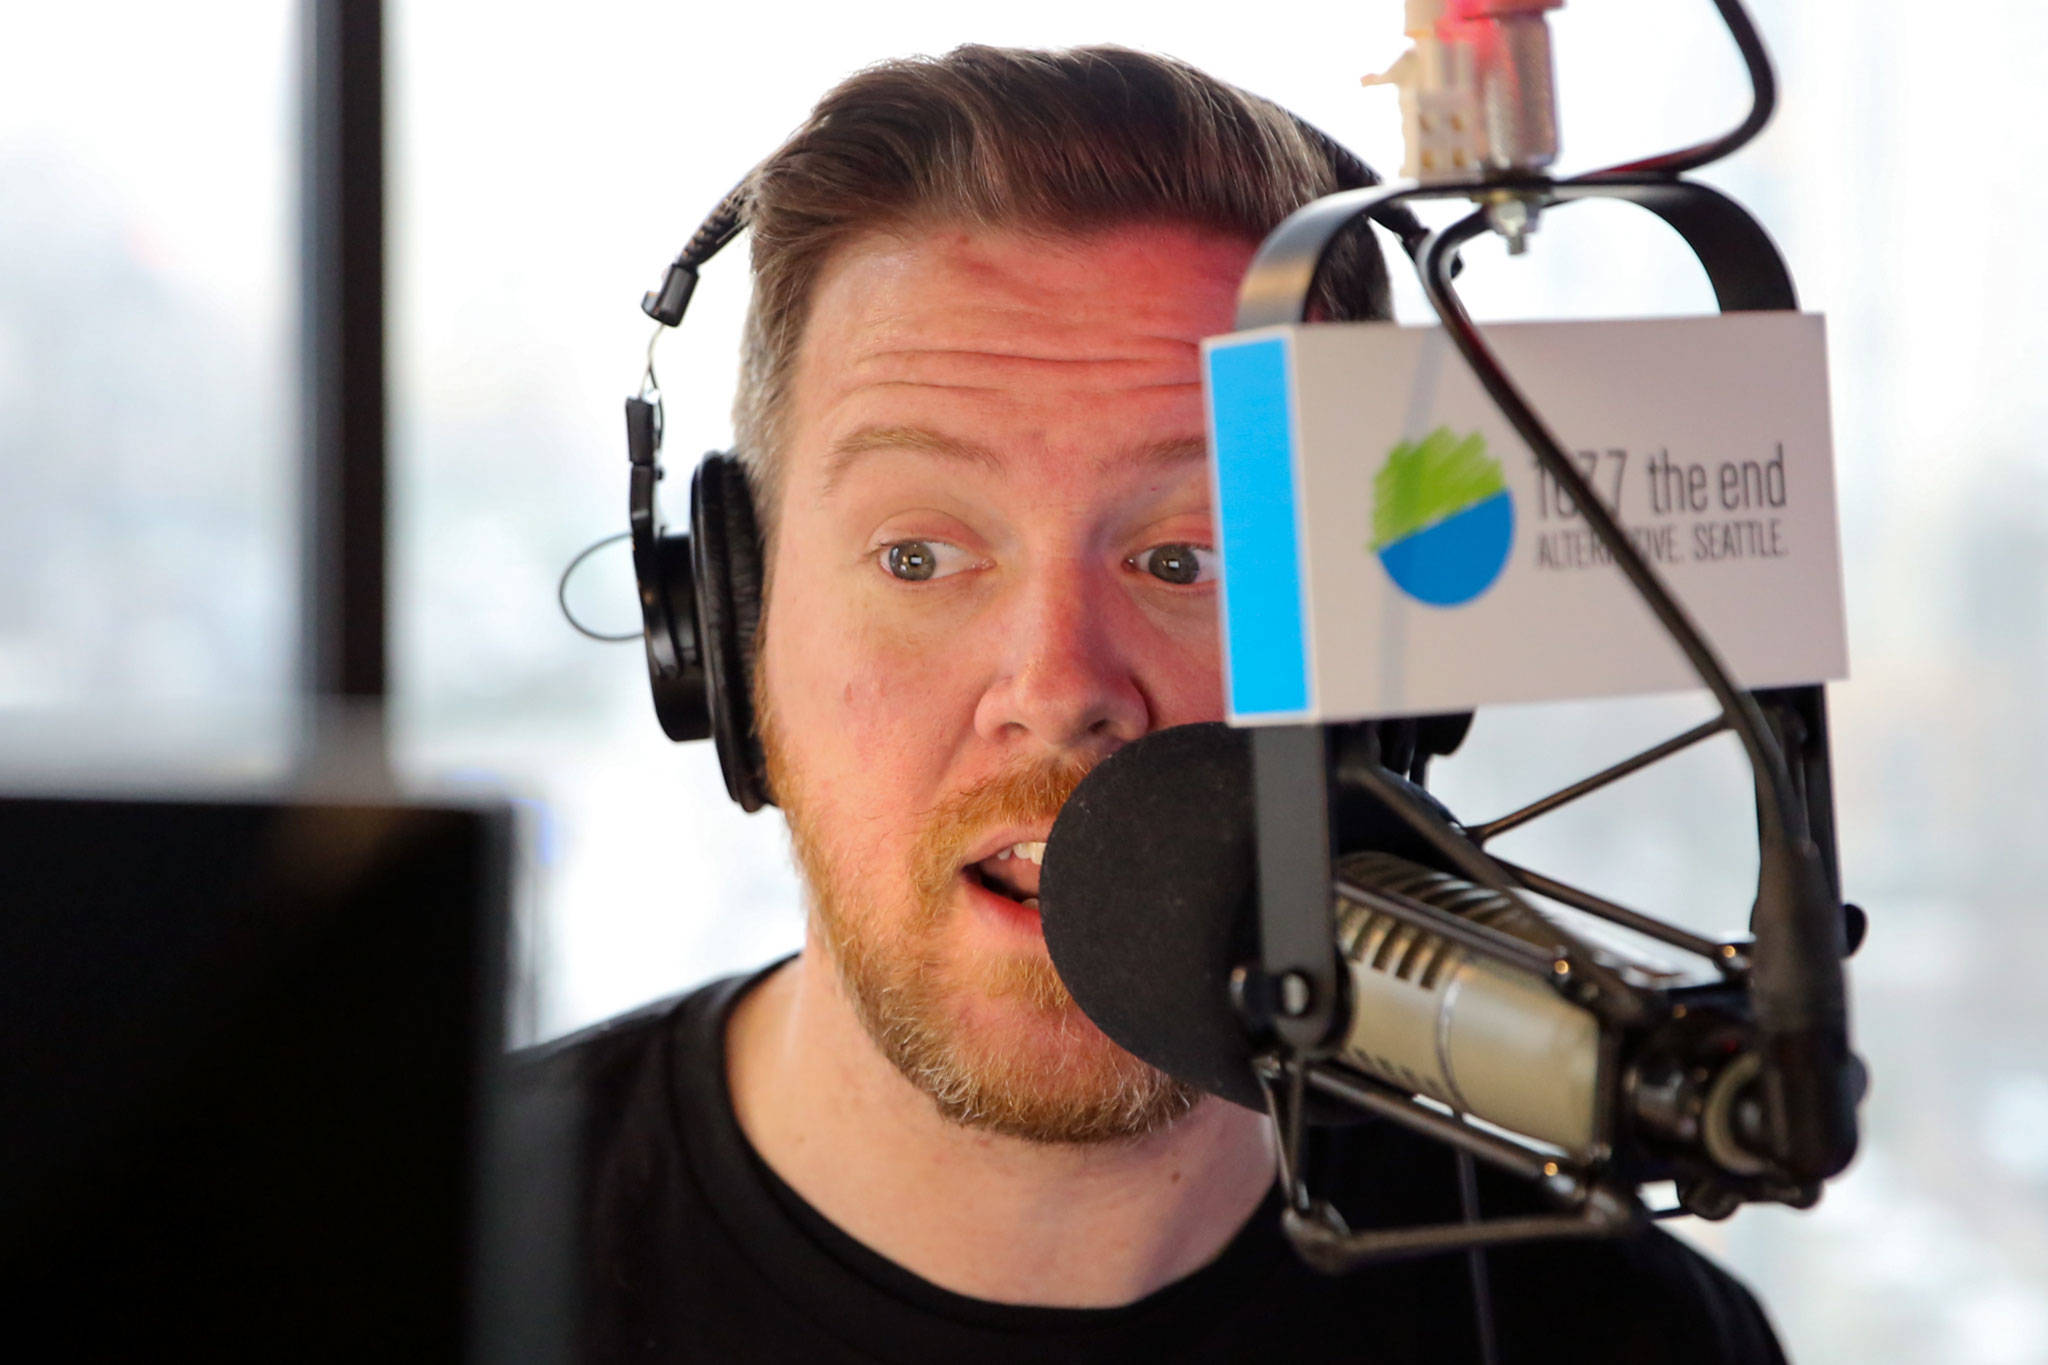 Gregr is on the air for 107.7 The End every weekday, from 6 to 10 a.m. It means an early wakeup and commute for him from his Snohomish home. (Kevin Clark / The Herald)